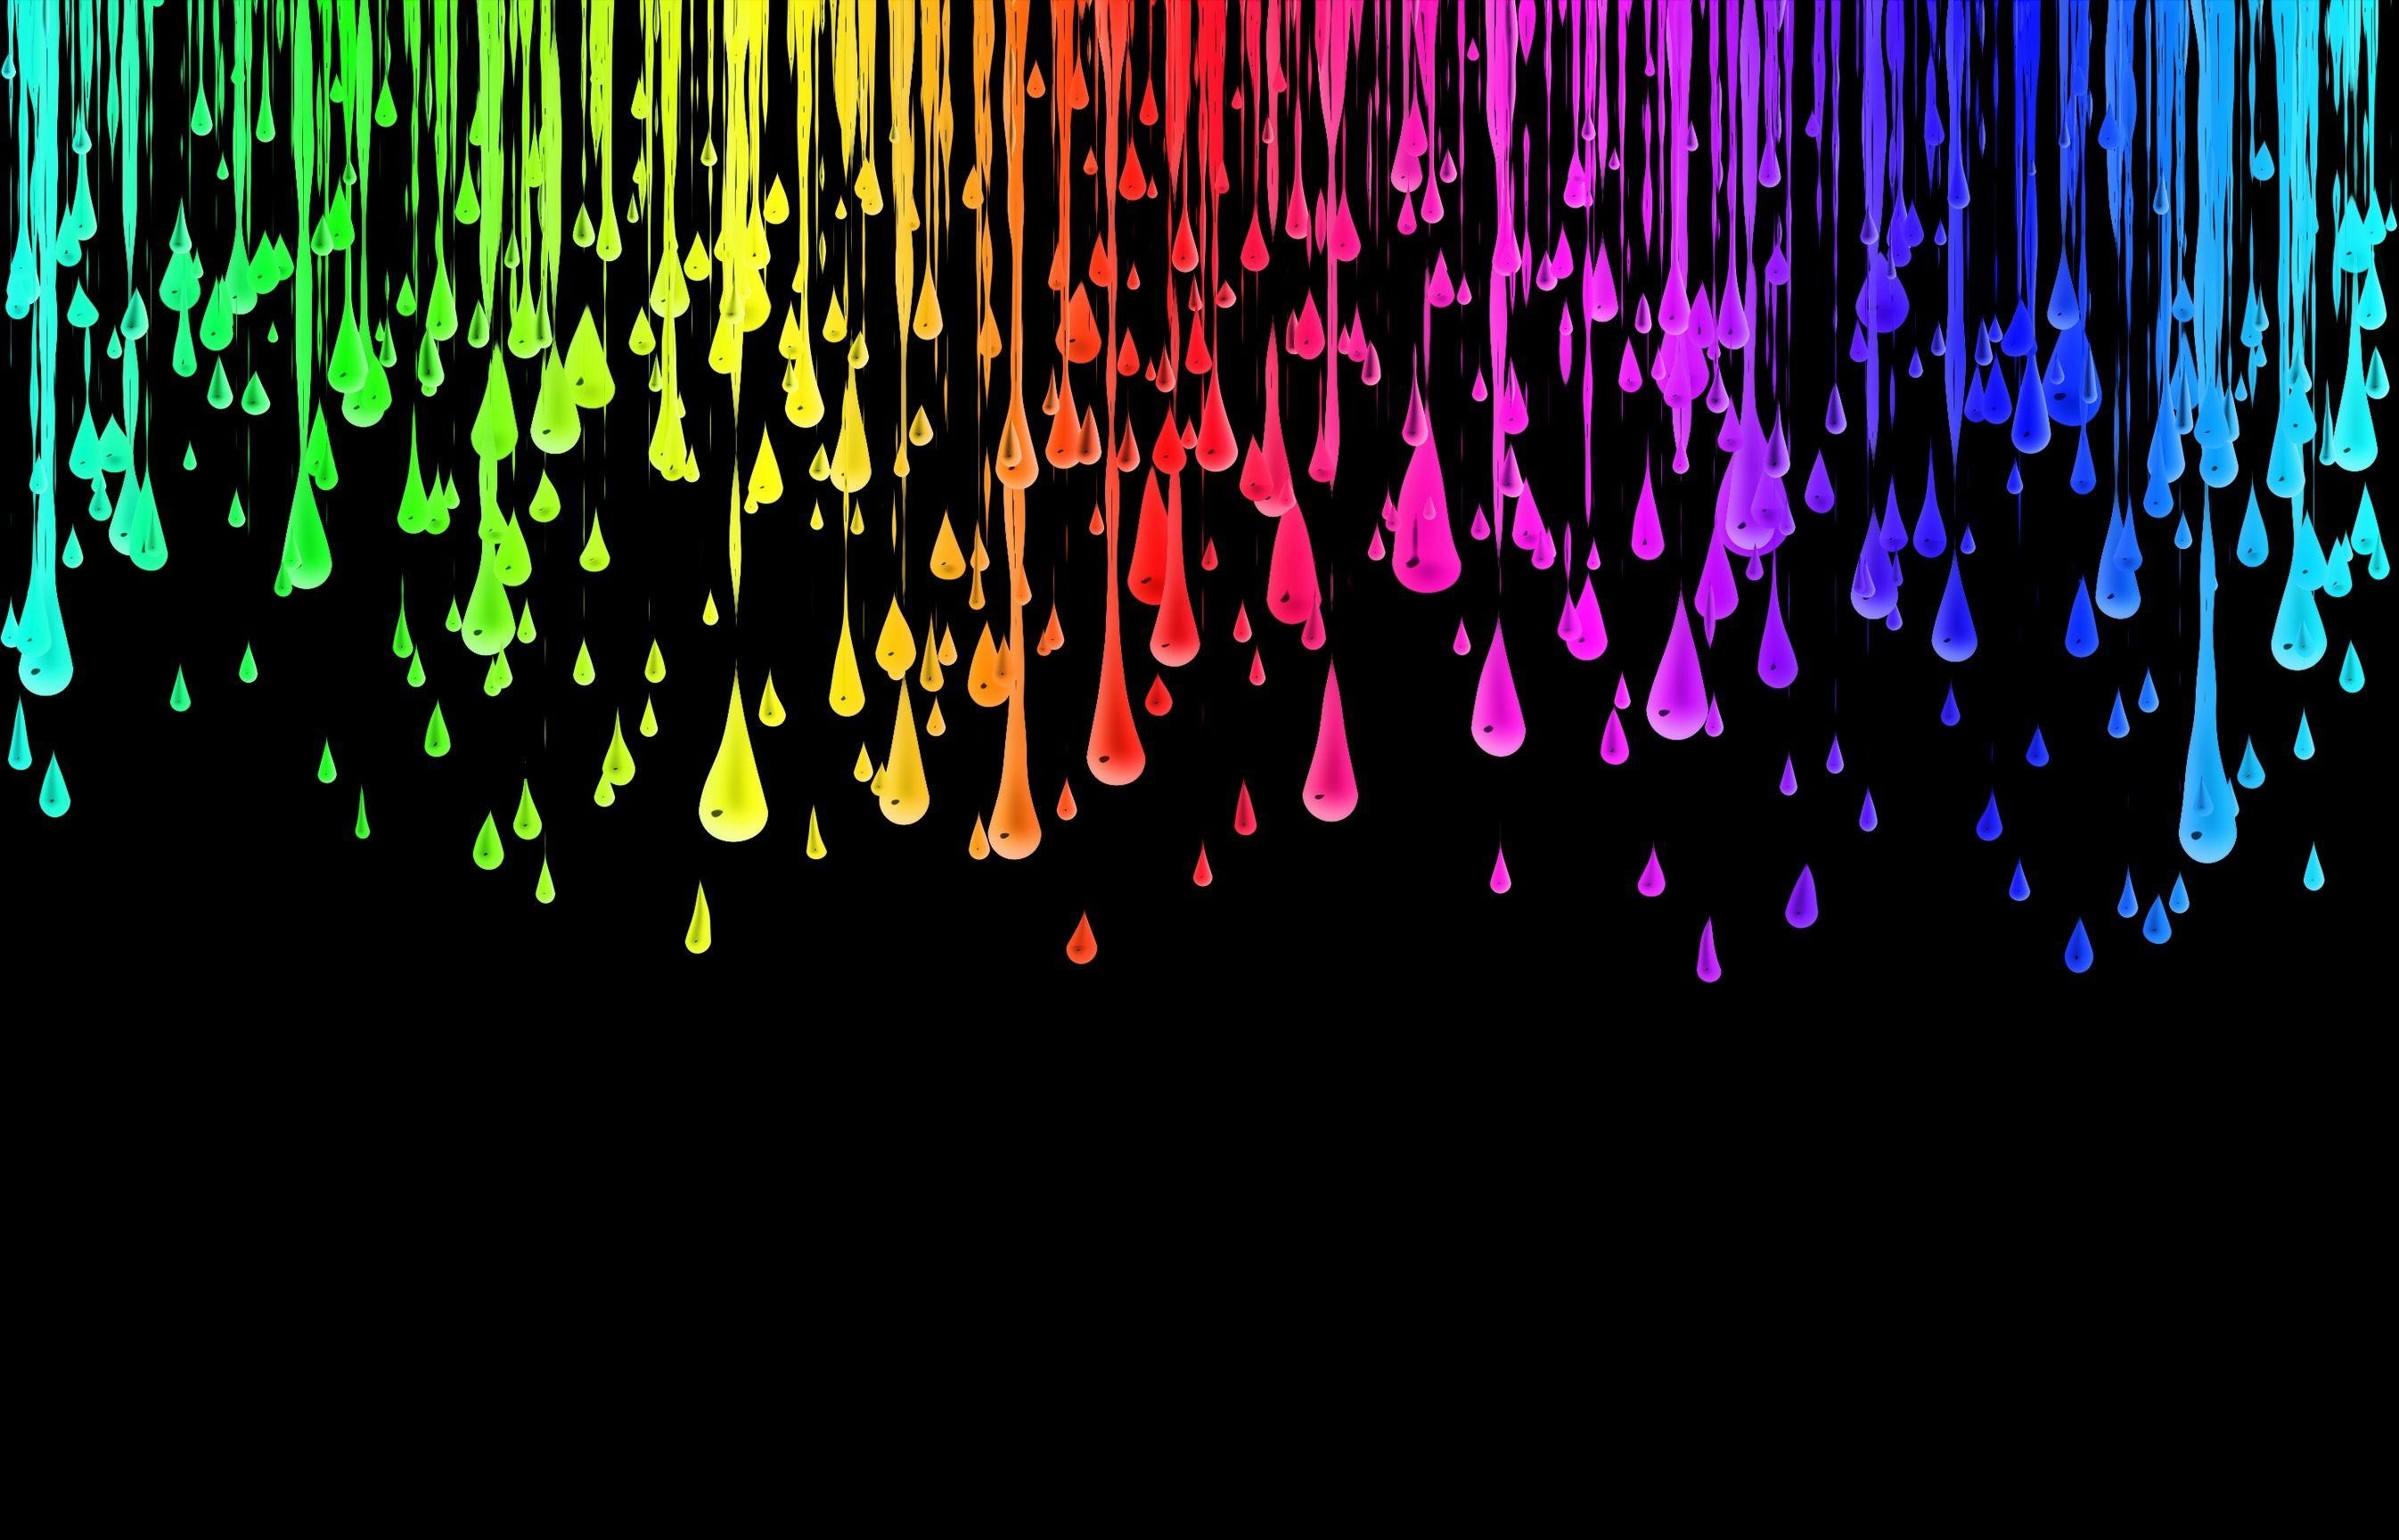 Smart Abstract Color Wallpaper 2692x1728PX ~ Hd Colours in Dark .